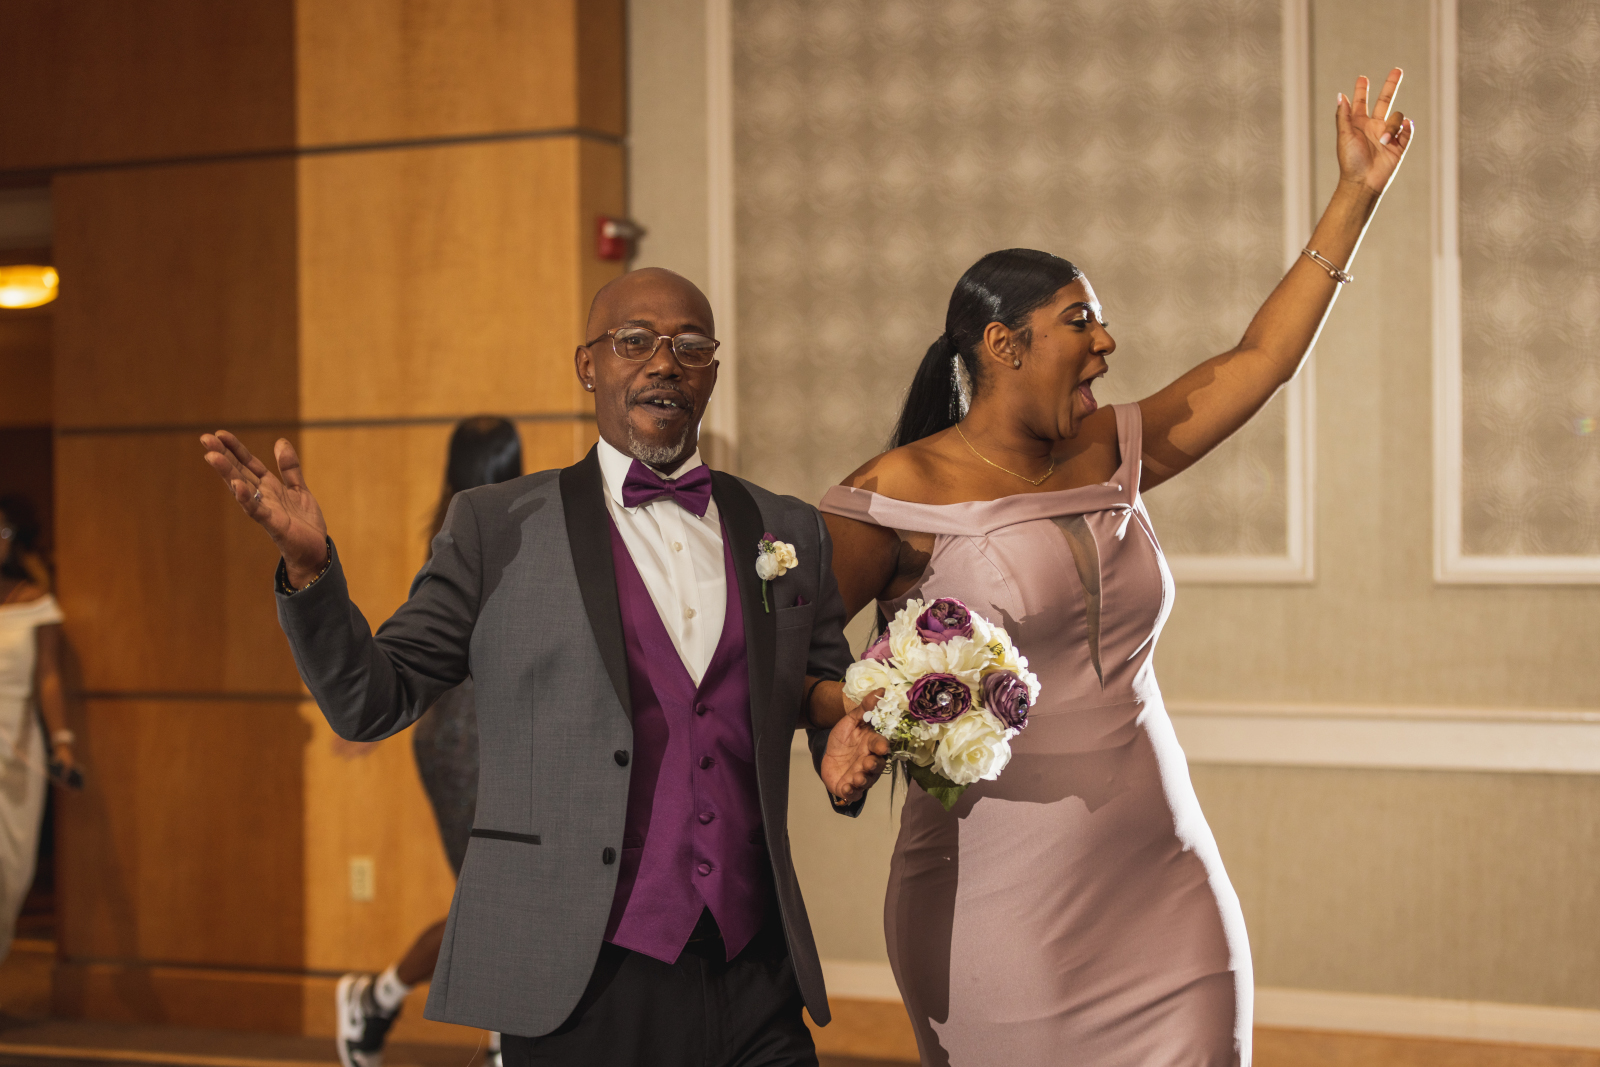 Father of the groom with bridesmaid, fun bridal party entrance, African American wedding, romantic wedding reception at Hilton Akron/Fairlawn